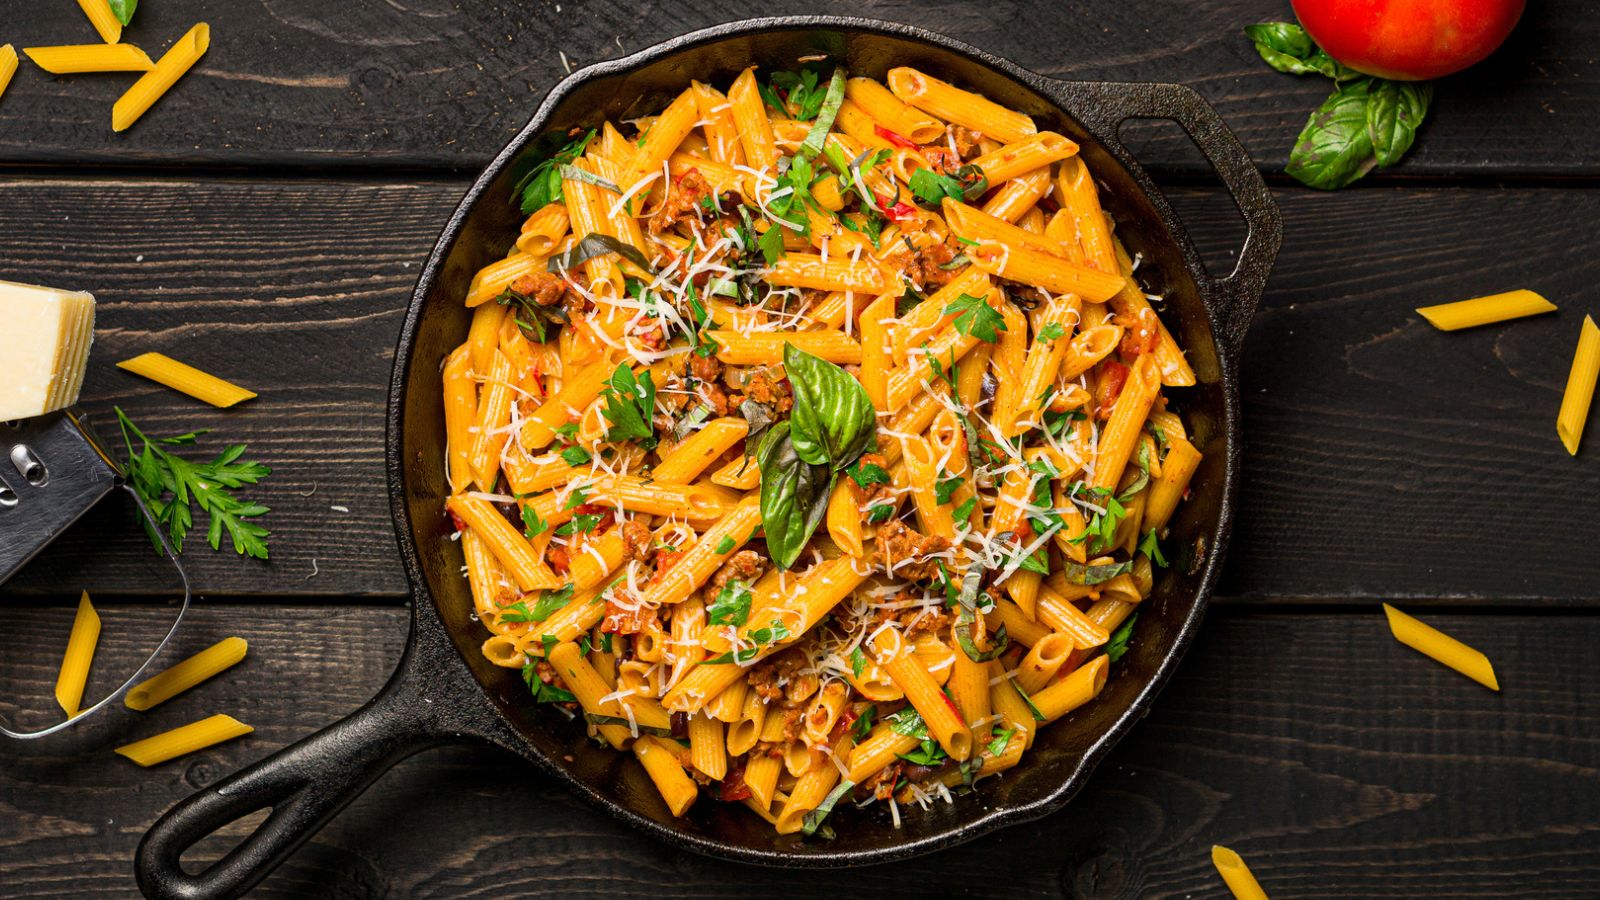 18 Healthy Pasta Recipes So Good They’re Better Than a Trip to Your Favorite Restaurant